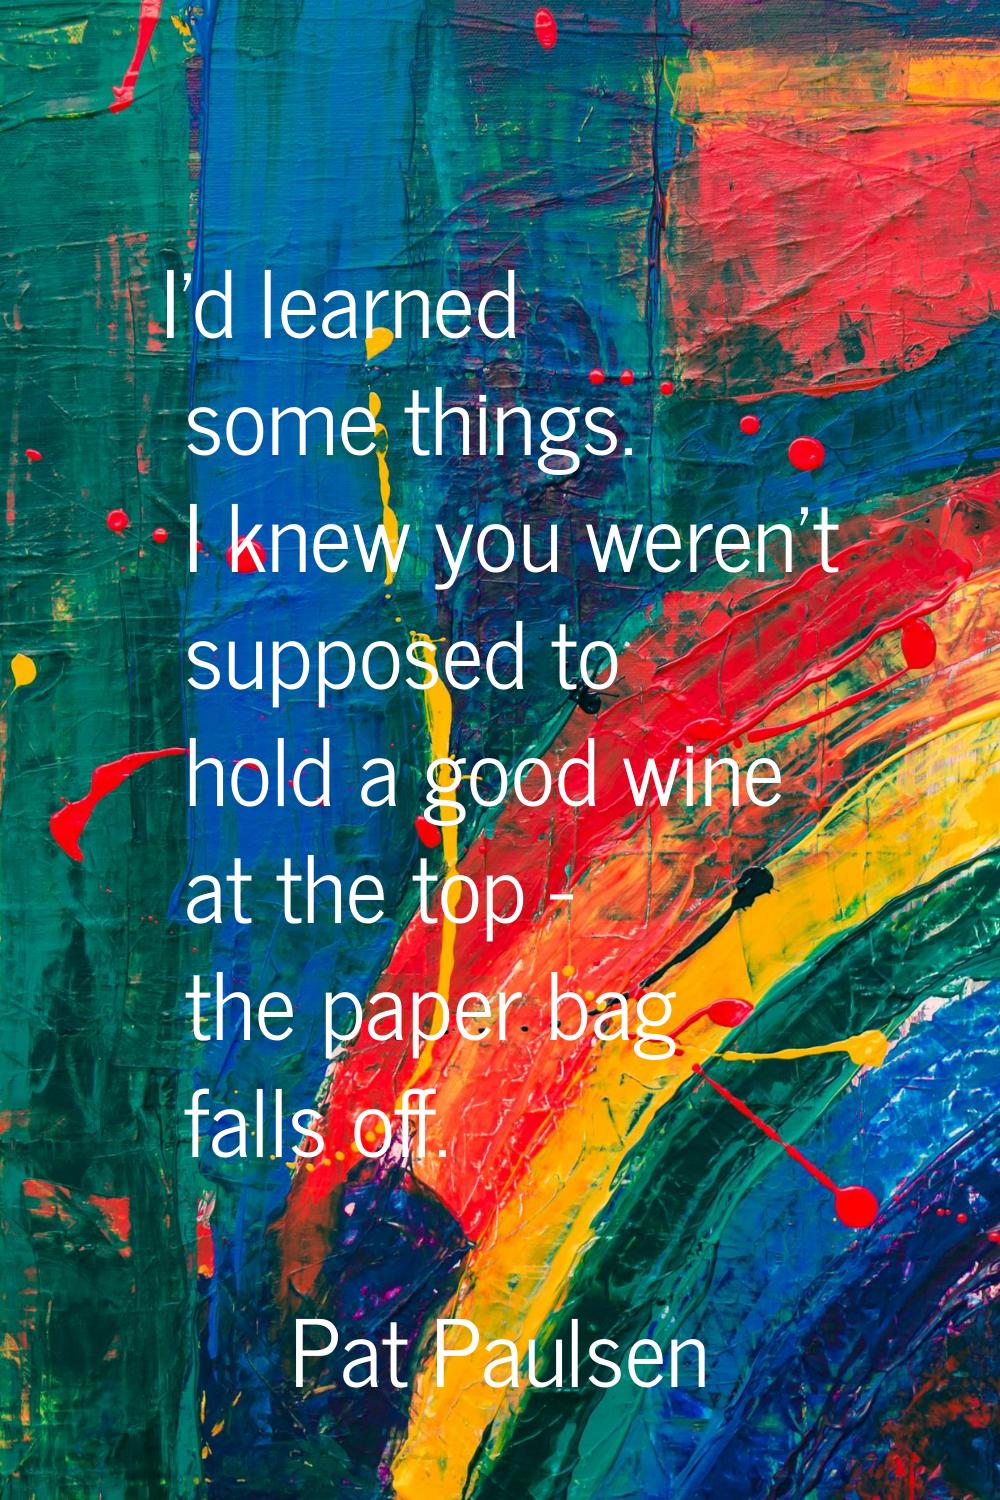 I'd learned some things. I knew you weren't supposed to hold a good wine at the top - the paper bag